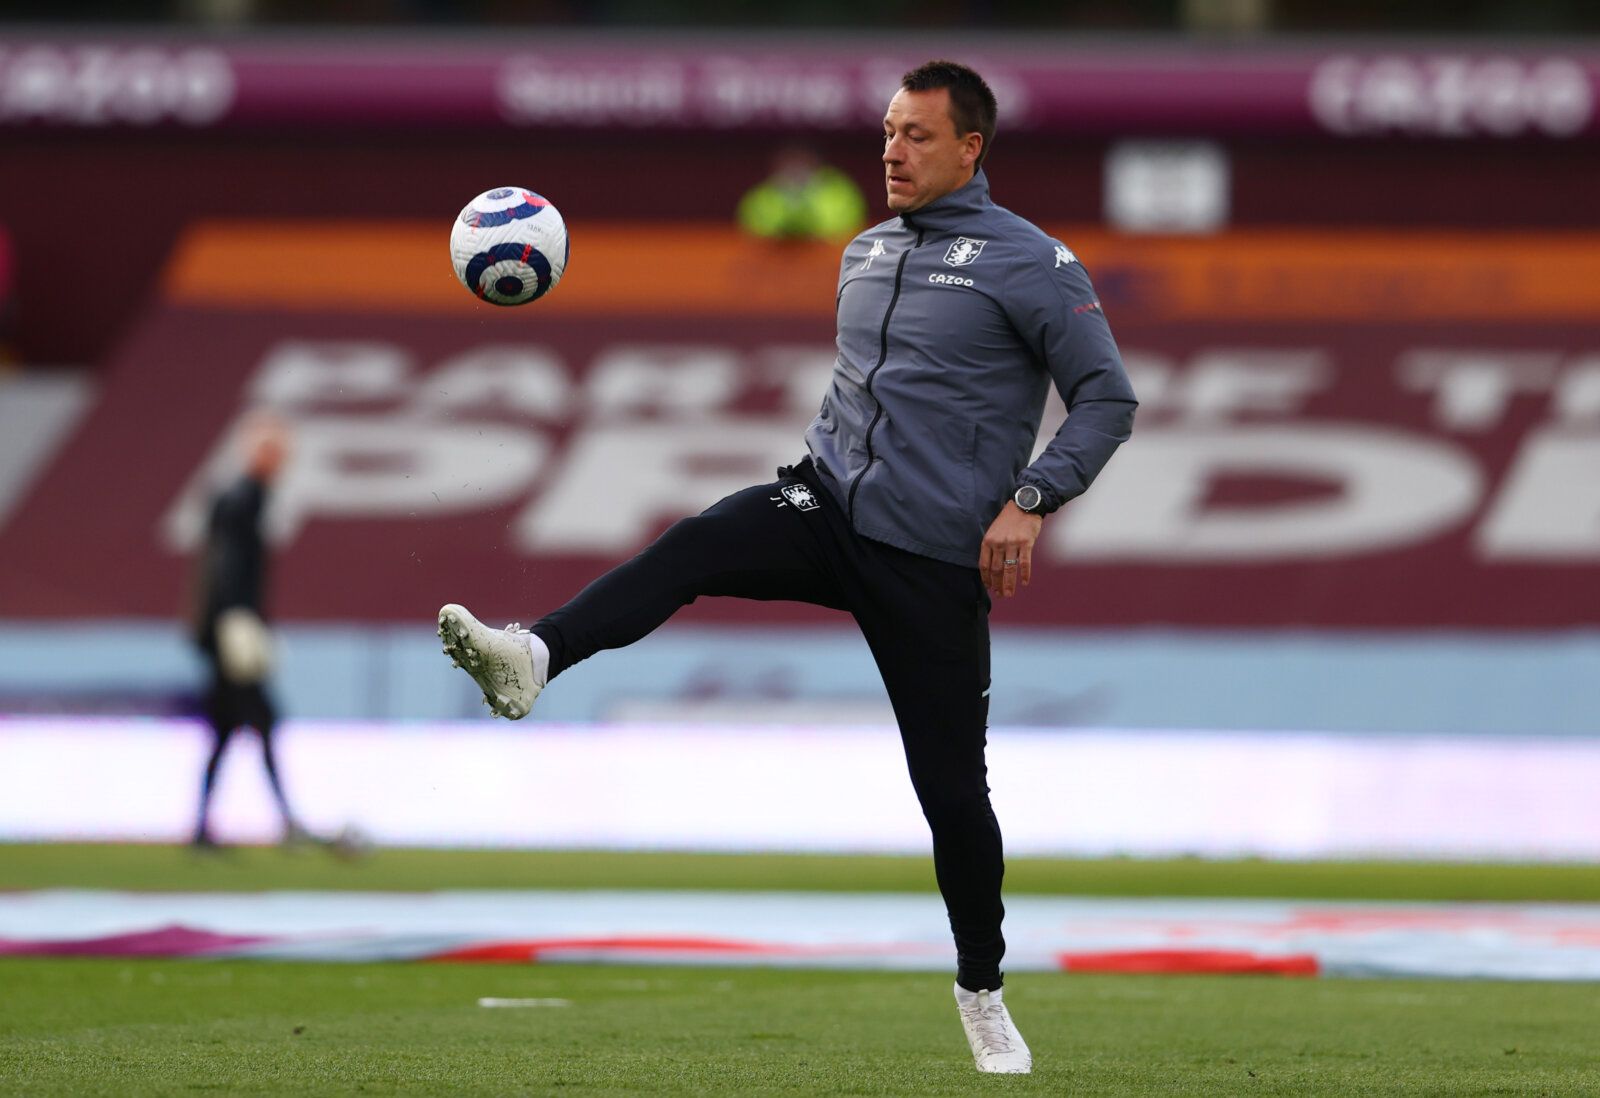 Soccer Football - Premier League - Aston Villa v West Bromwich Albion  - Villa Park, Birmingham, Britain - April 25, 2021 Aston Villa assistant manager John Terry during the warm up before the match Pool via REUTERS/Michael Steele EDITORIAL USE ONLY. No use with unauthorized audio, video, data, fixture lists, club/league logos or 'live' services. Online in-match use limited to 75 images, no video emulation. No use in betting, games or single club /league/player publications.  Please contact your